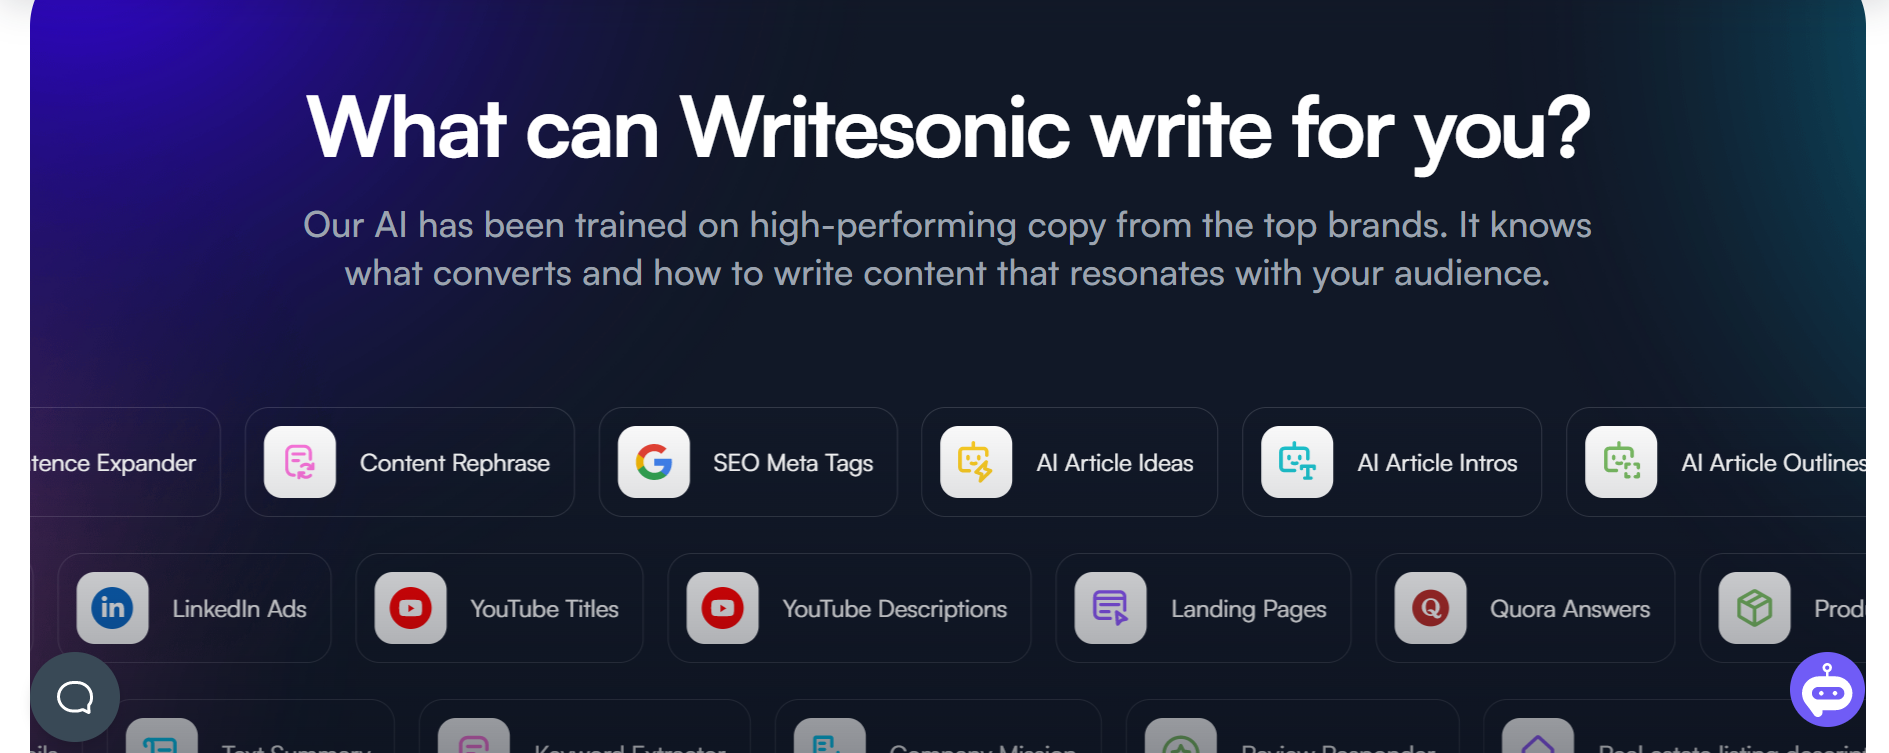 Writesonic Landing Page - What can Writesonic write for you?